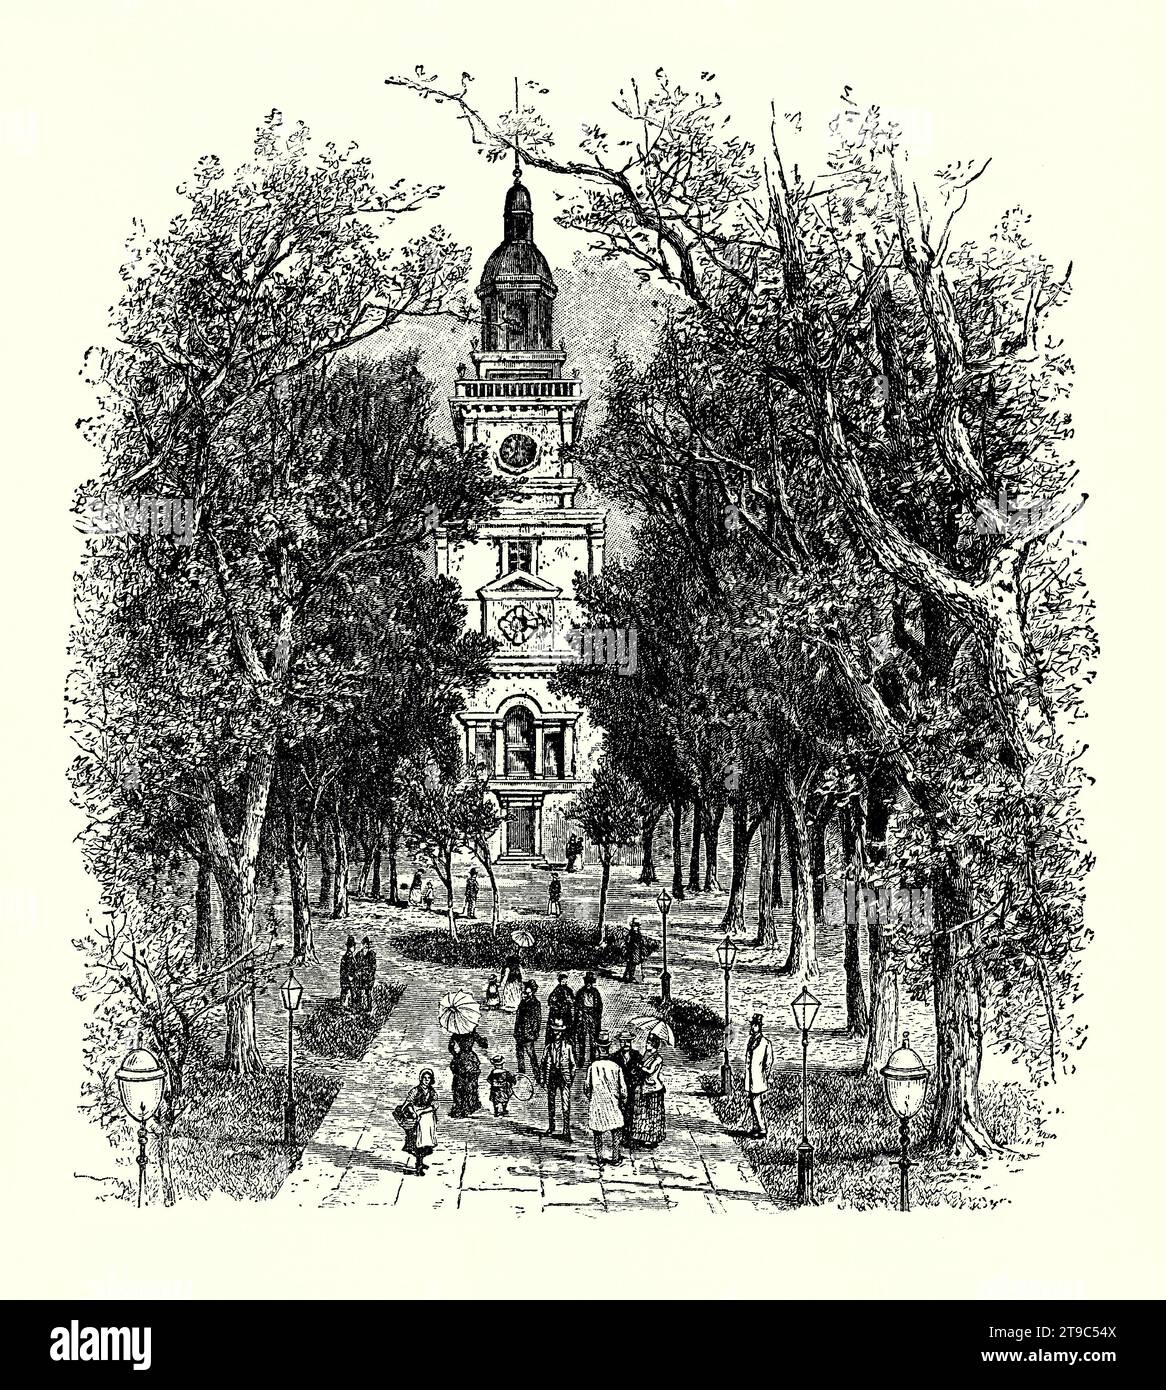 An old engraving of people strolling in the grounds at the rear of Independence Hall, Philadelphia, Pennsylvania, USA in the 1700s. It is from an American history book of 1895. Independence Hall is a historic civic building where both the United States Declaration of Independence and the United States Constitution were debated and ratified in 1788 by America's Founding Fathers. The building was completed in 1753 as the Pennsylvania State House. It served as the first capitol of both the United States and of the Province and later the Commonwealth of Pennsylvania. Stock Photo